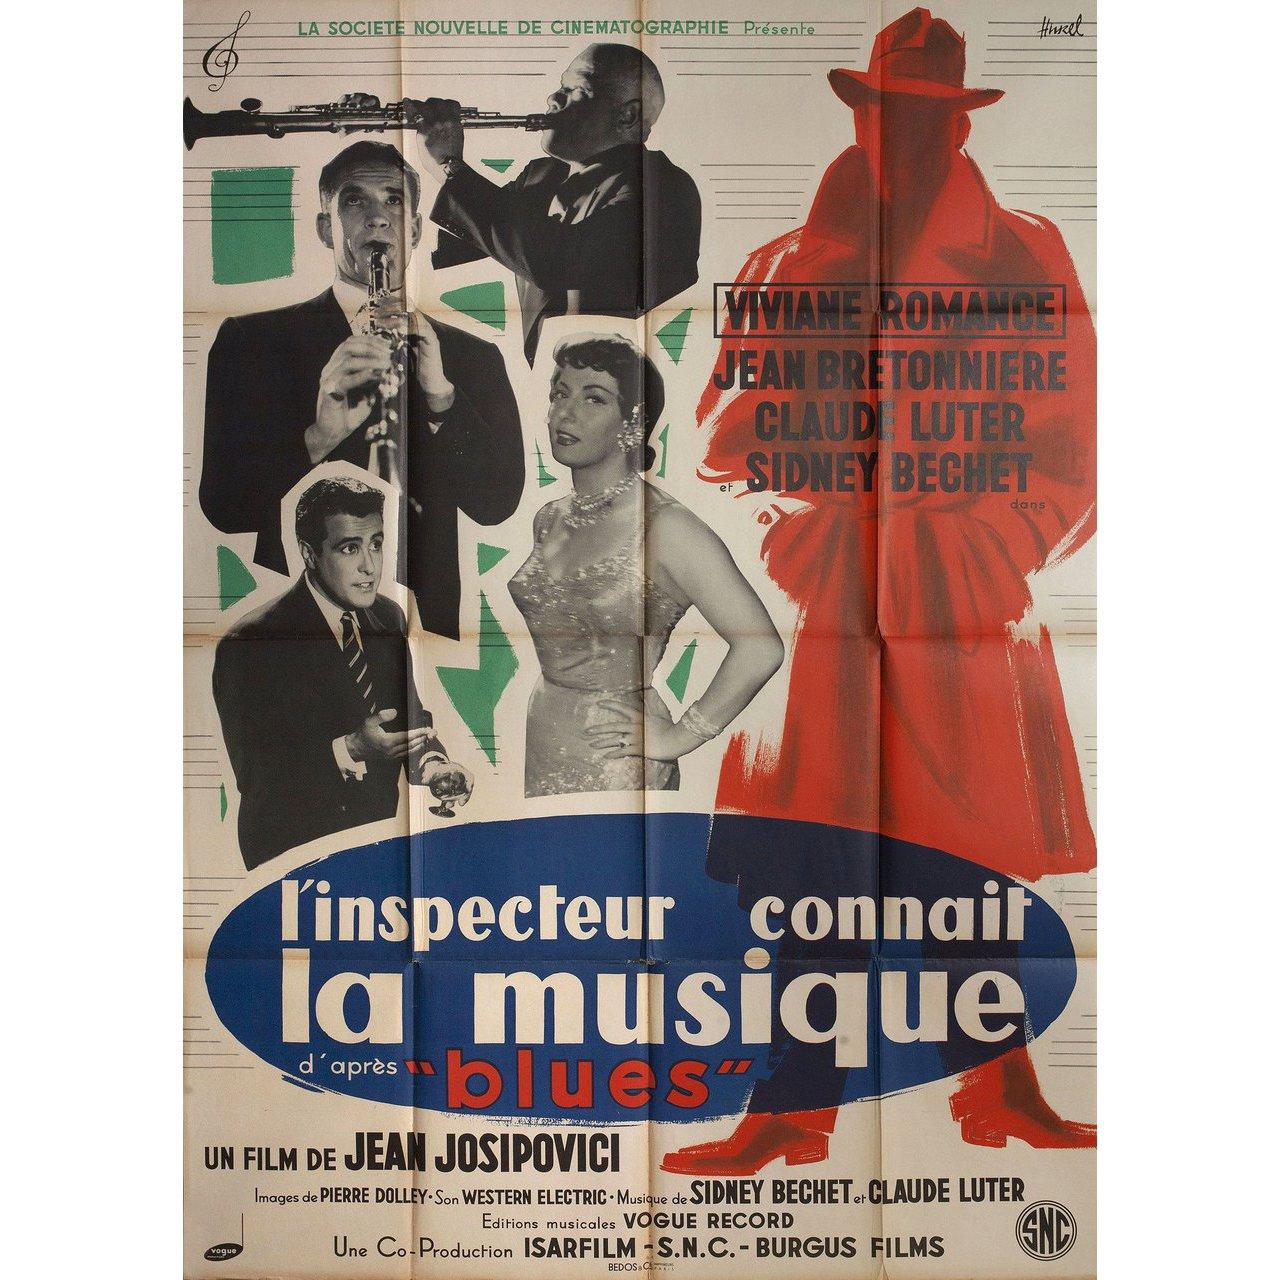 L'inspecteur connait la musique 1956 French Grande Film Poster In Good Condition For Sale In New York, NY